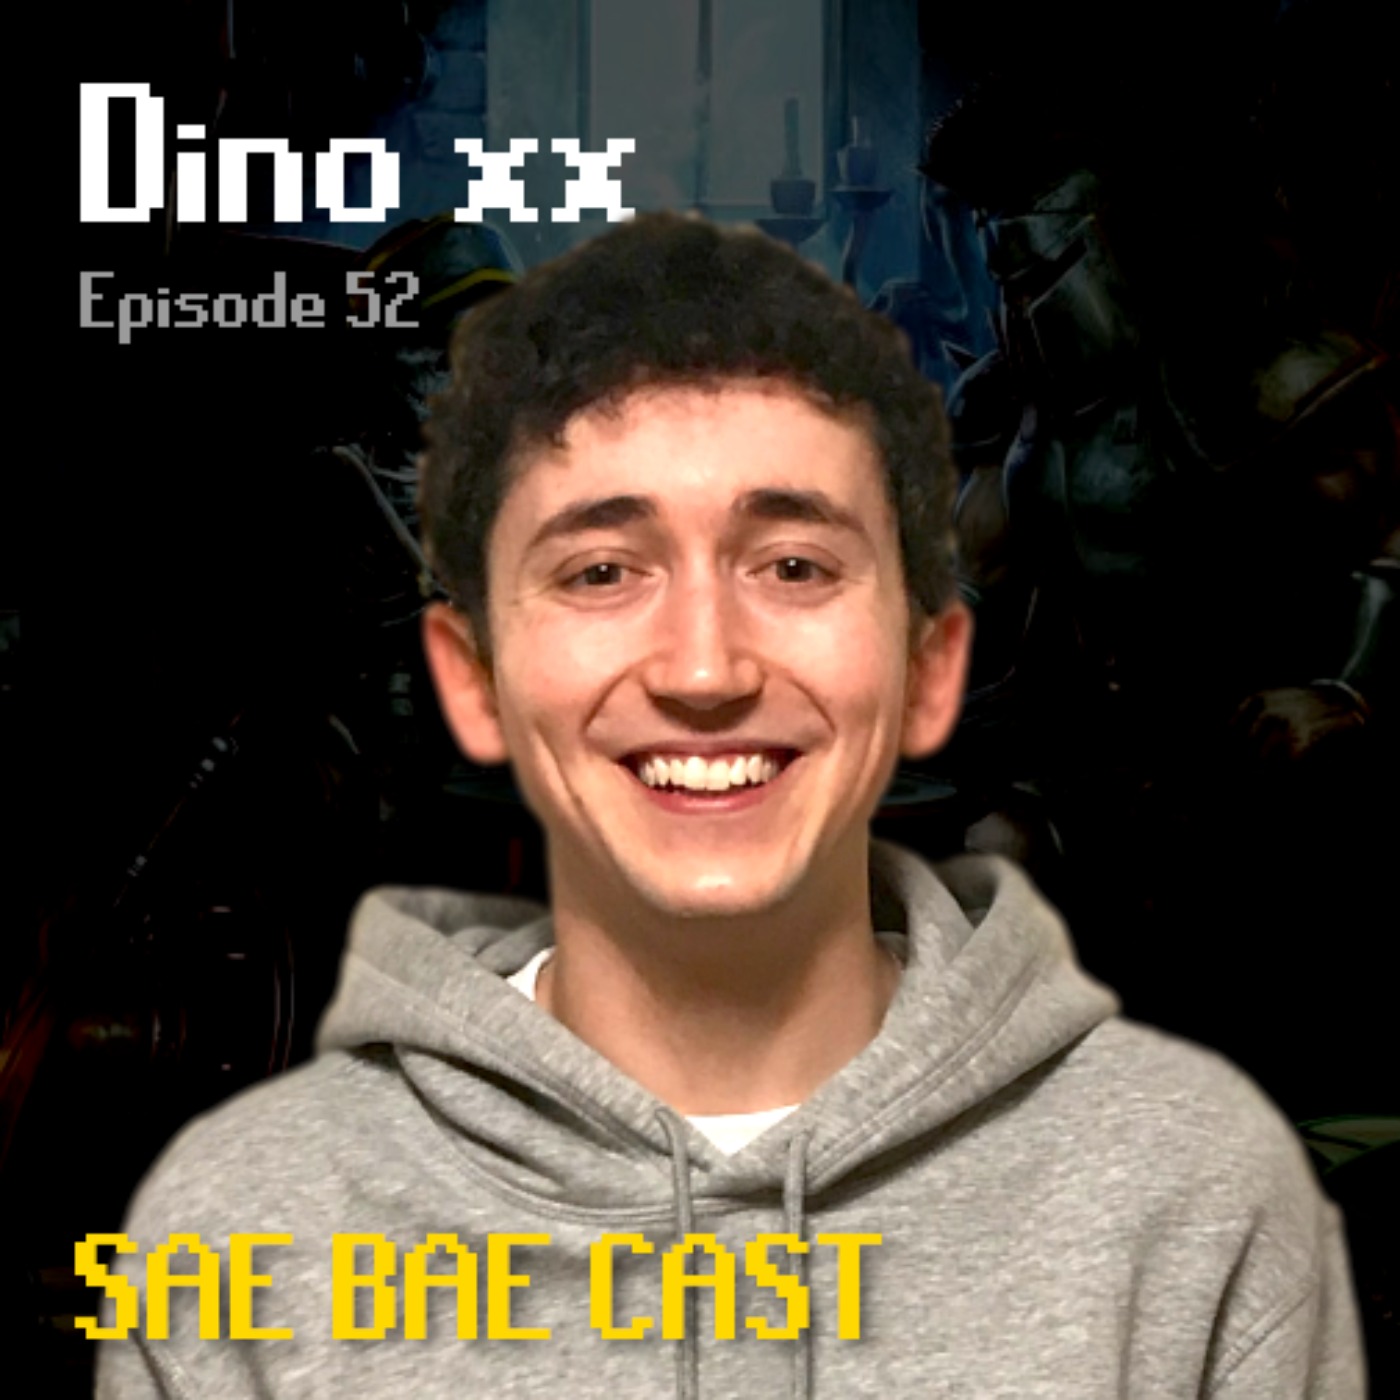 Dino xx - State of the Wilderness, PK Skull Prevention, DMM, Future of PvP | Sae Bae Cast 52